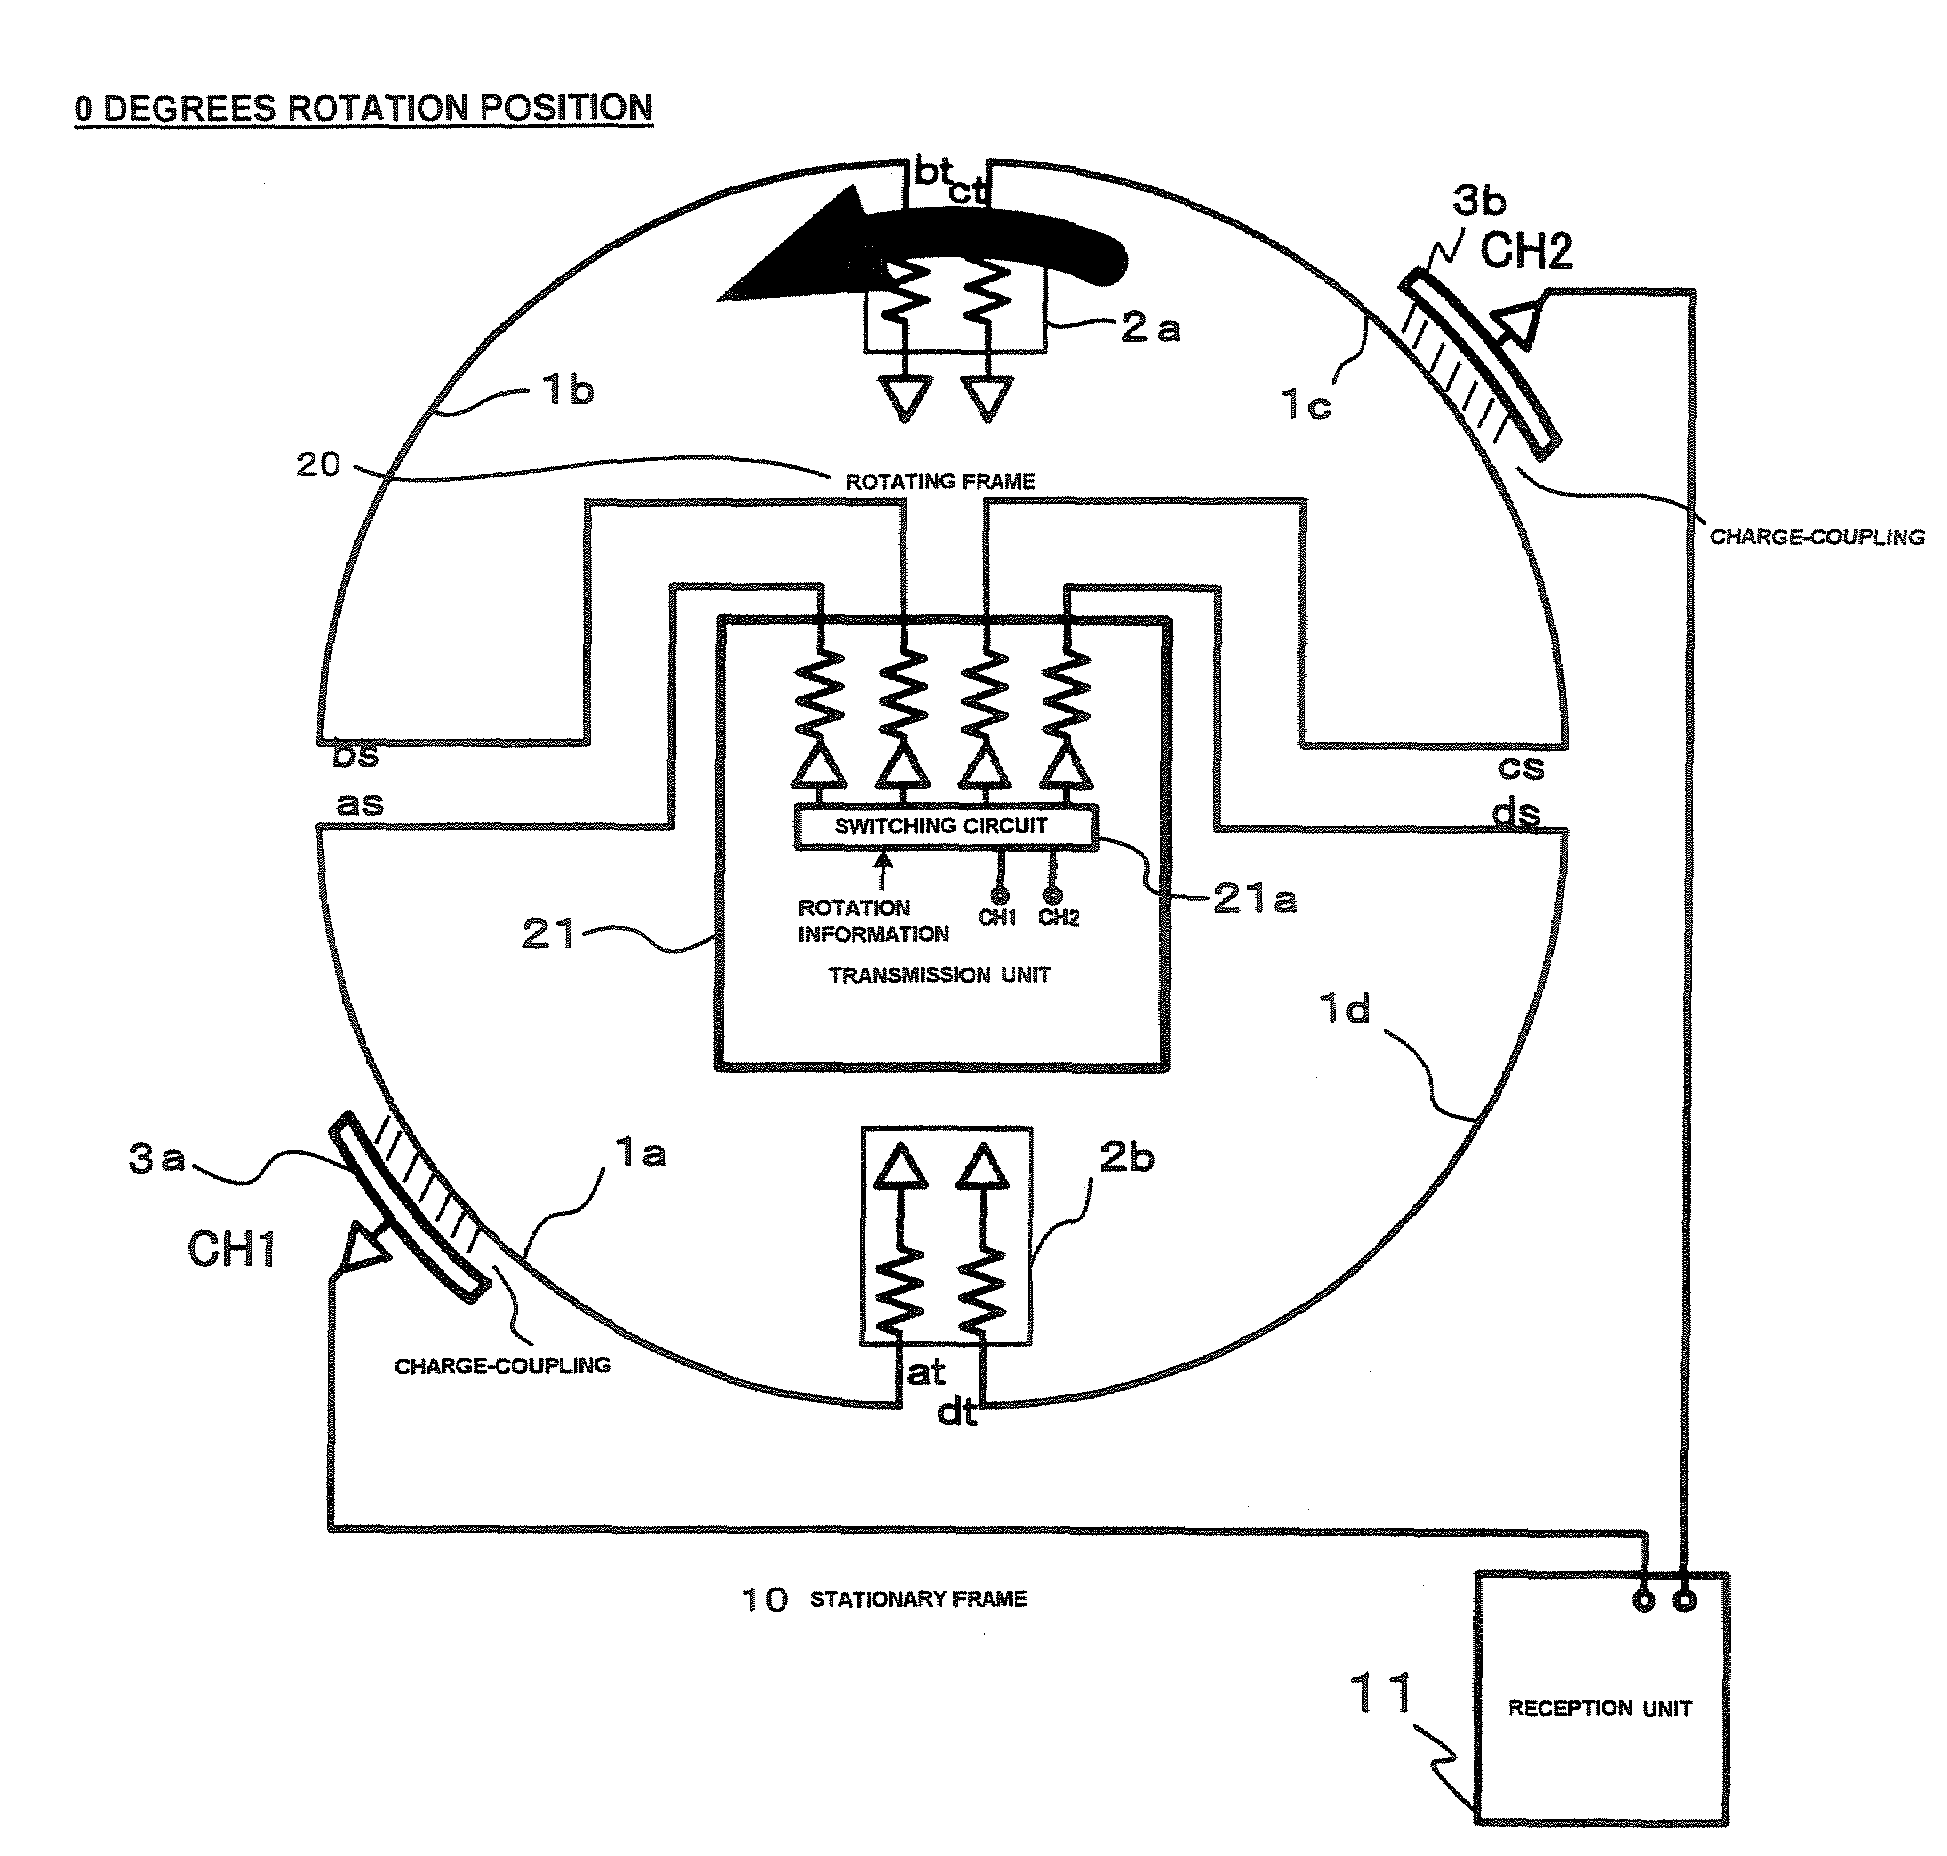 X-ray CT apparatus and medical data communication link system